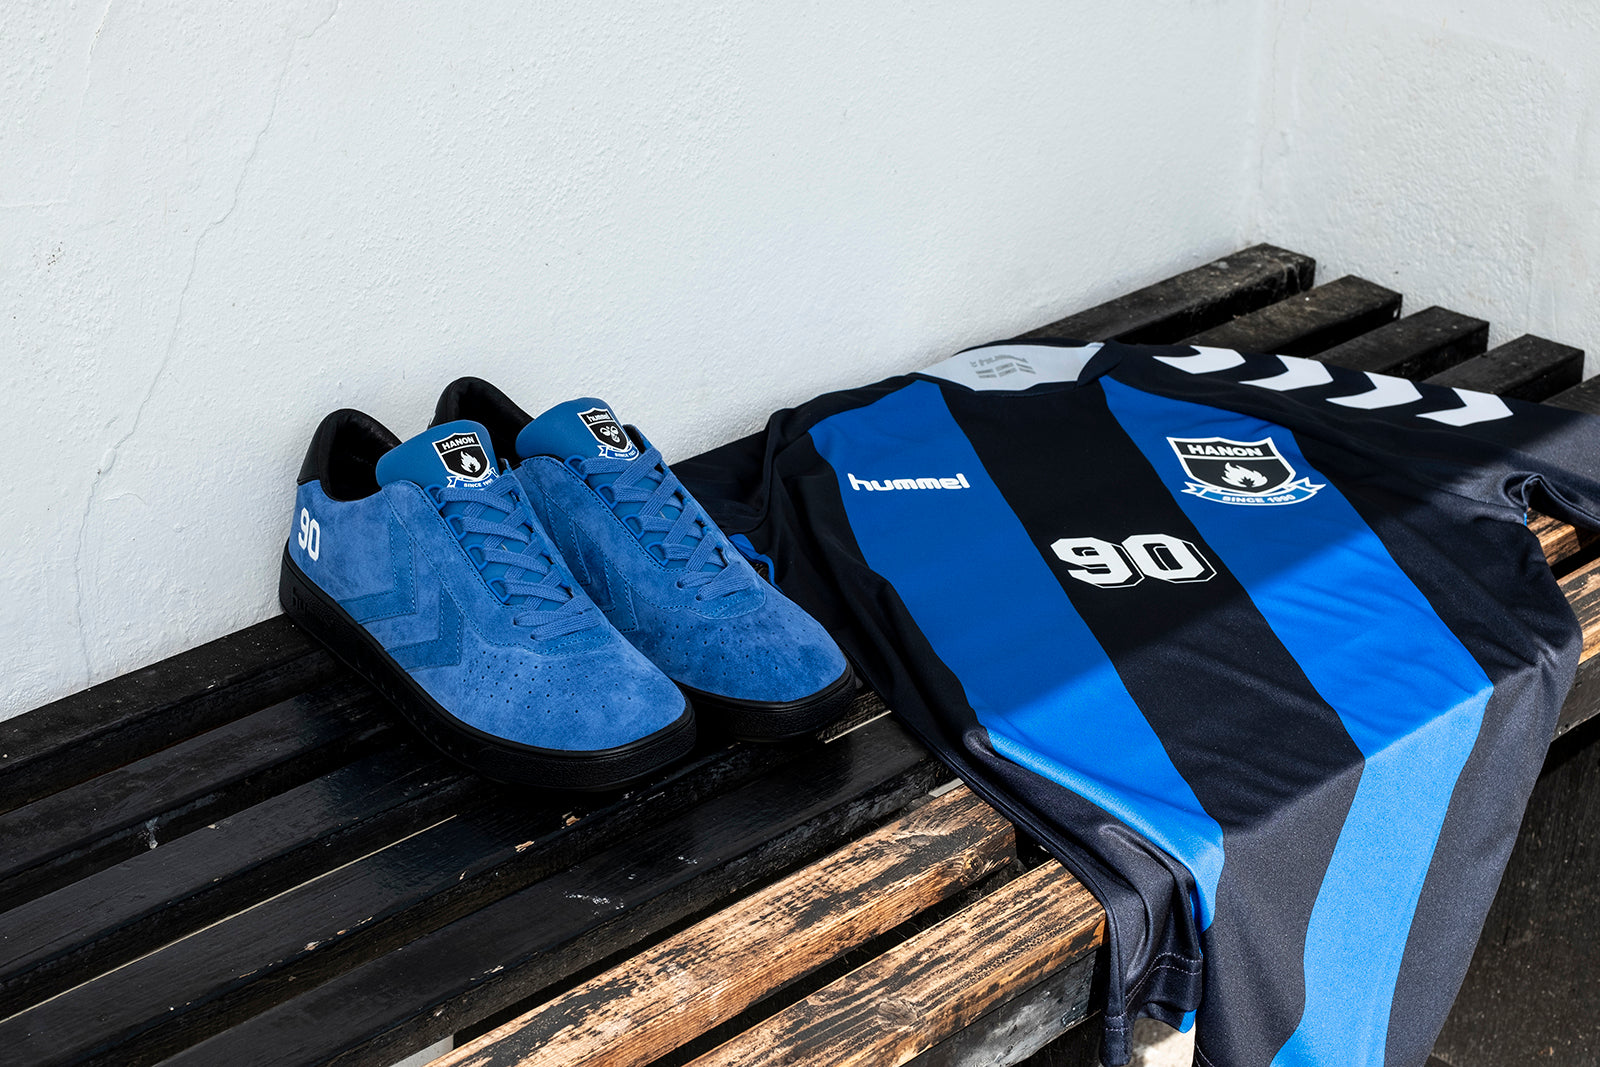 HANON "Standing Only" Football Pack